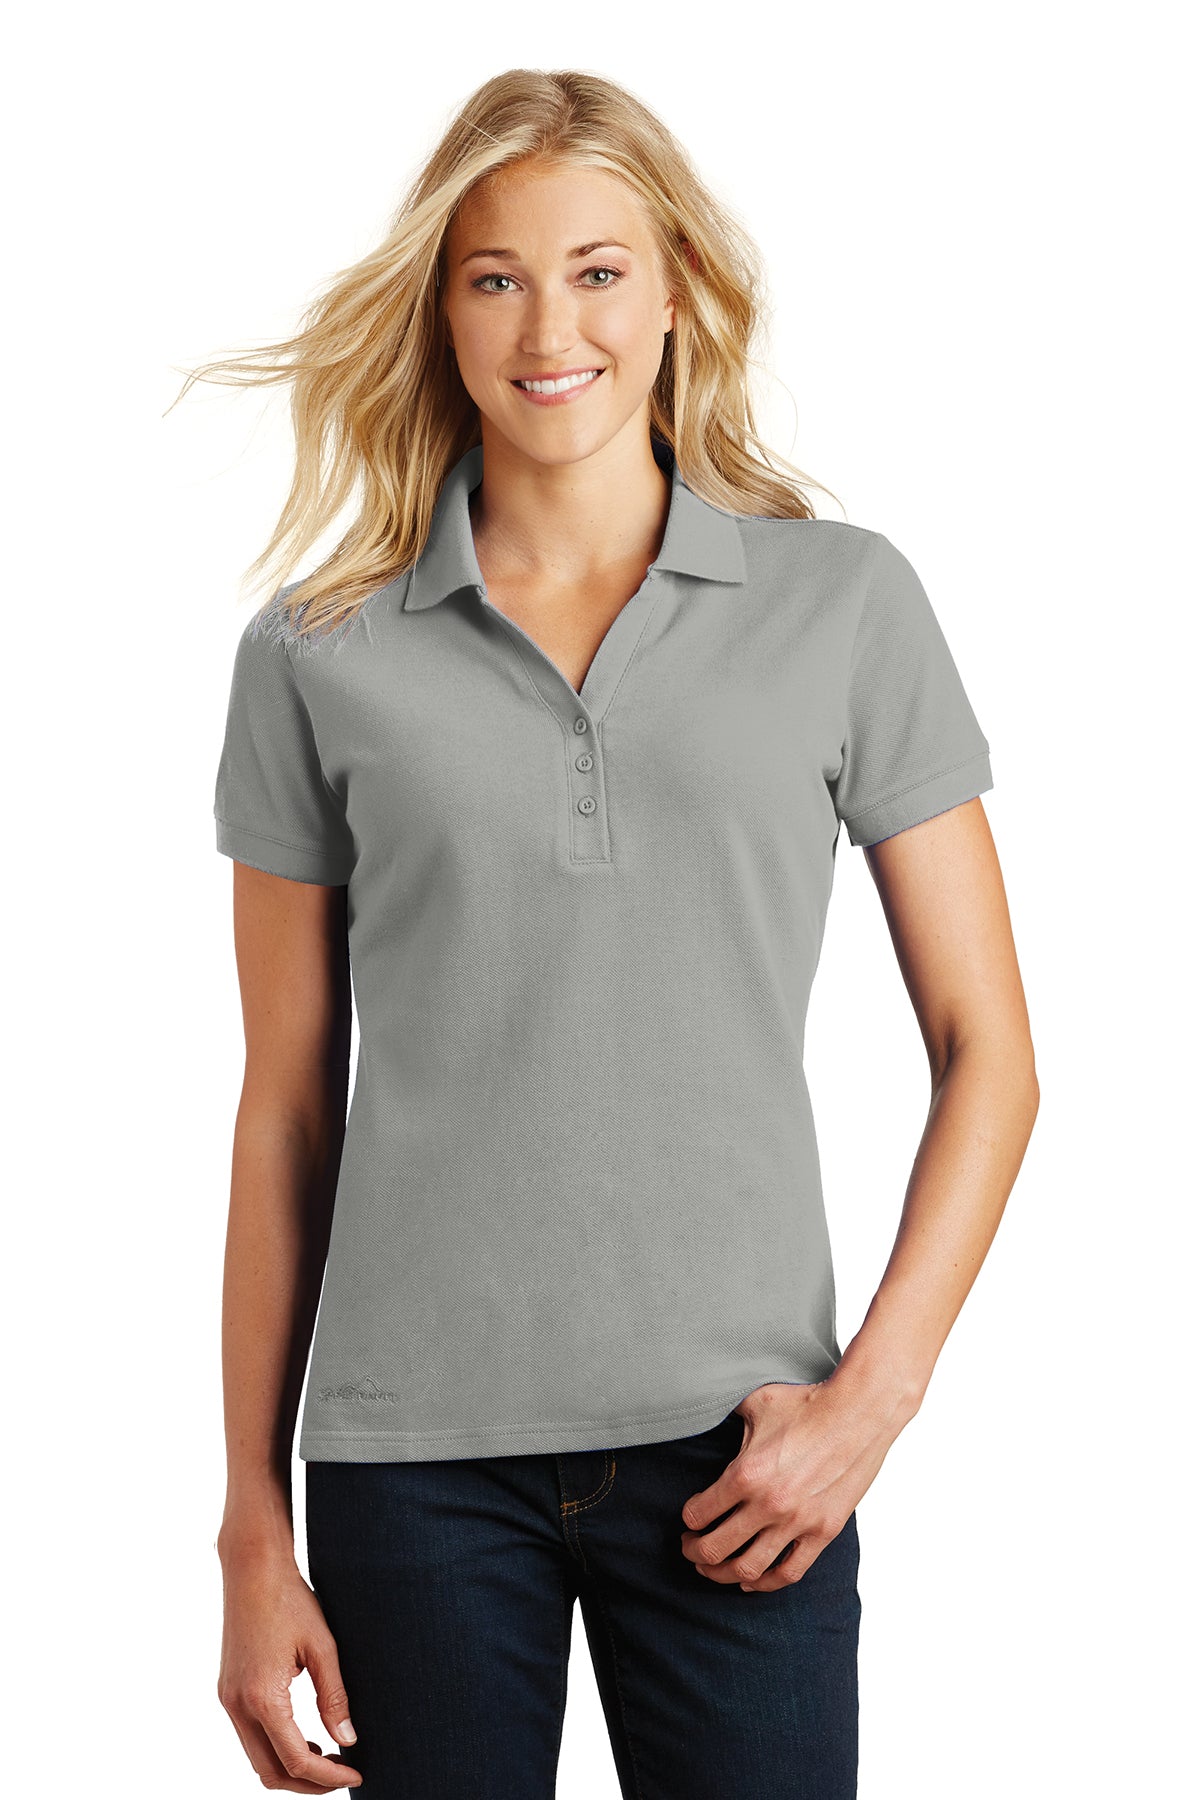 LL Lake Image (Embroidered) Women's Eddie Bauer golf polo